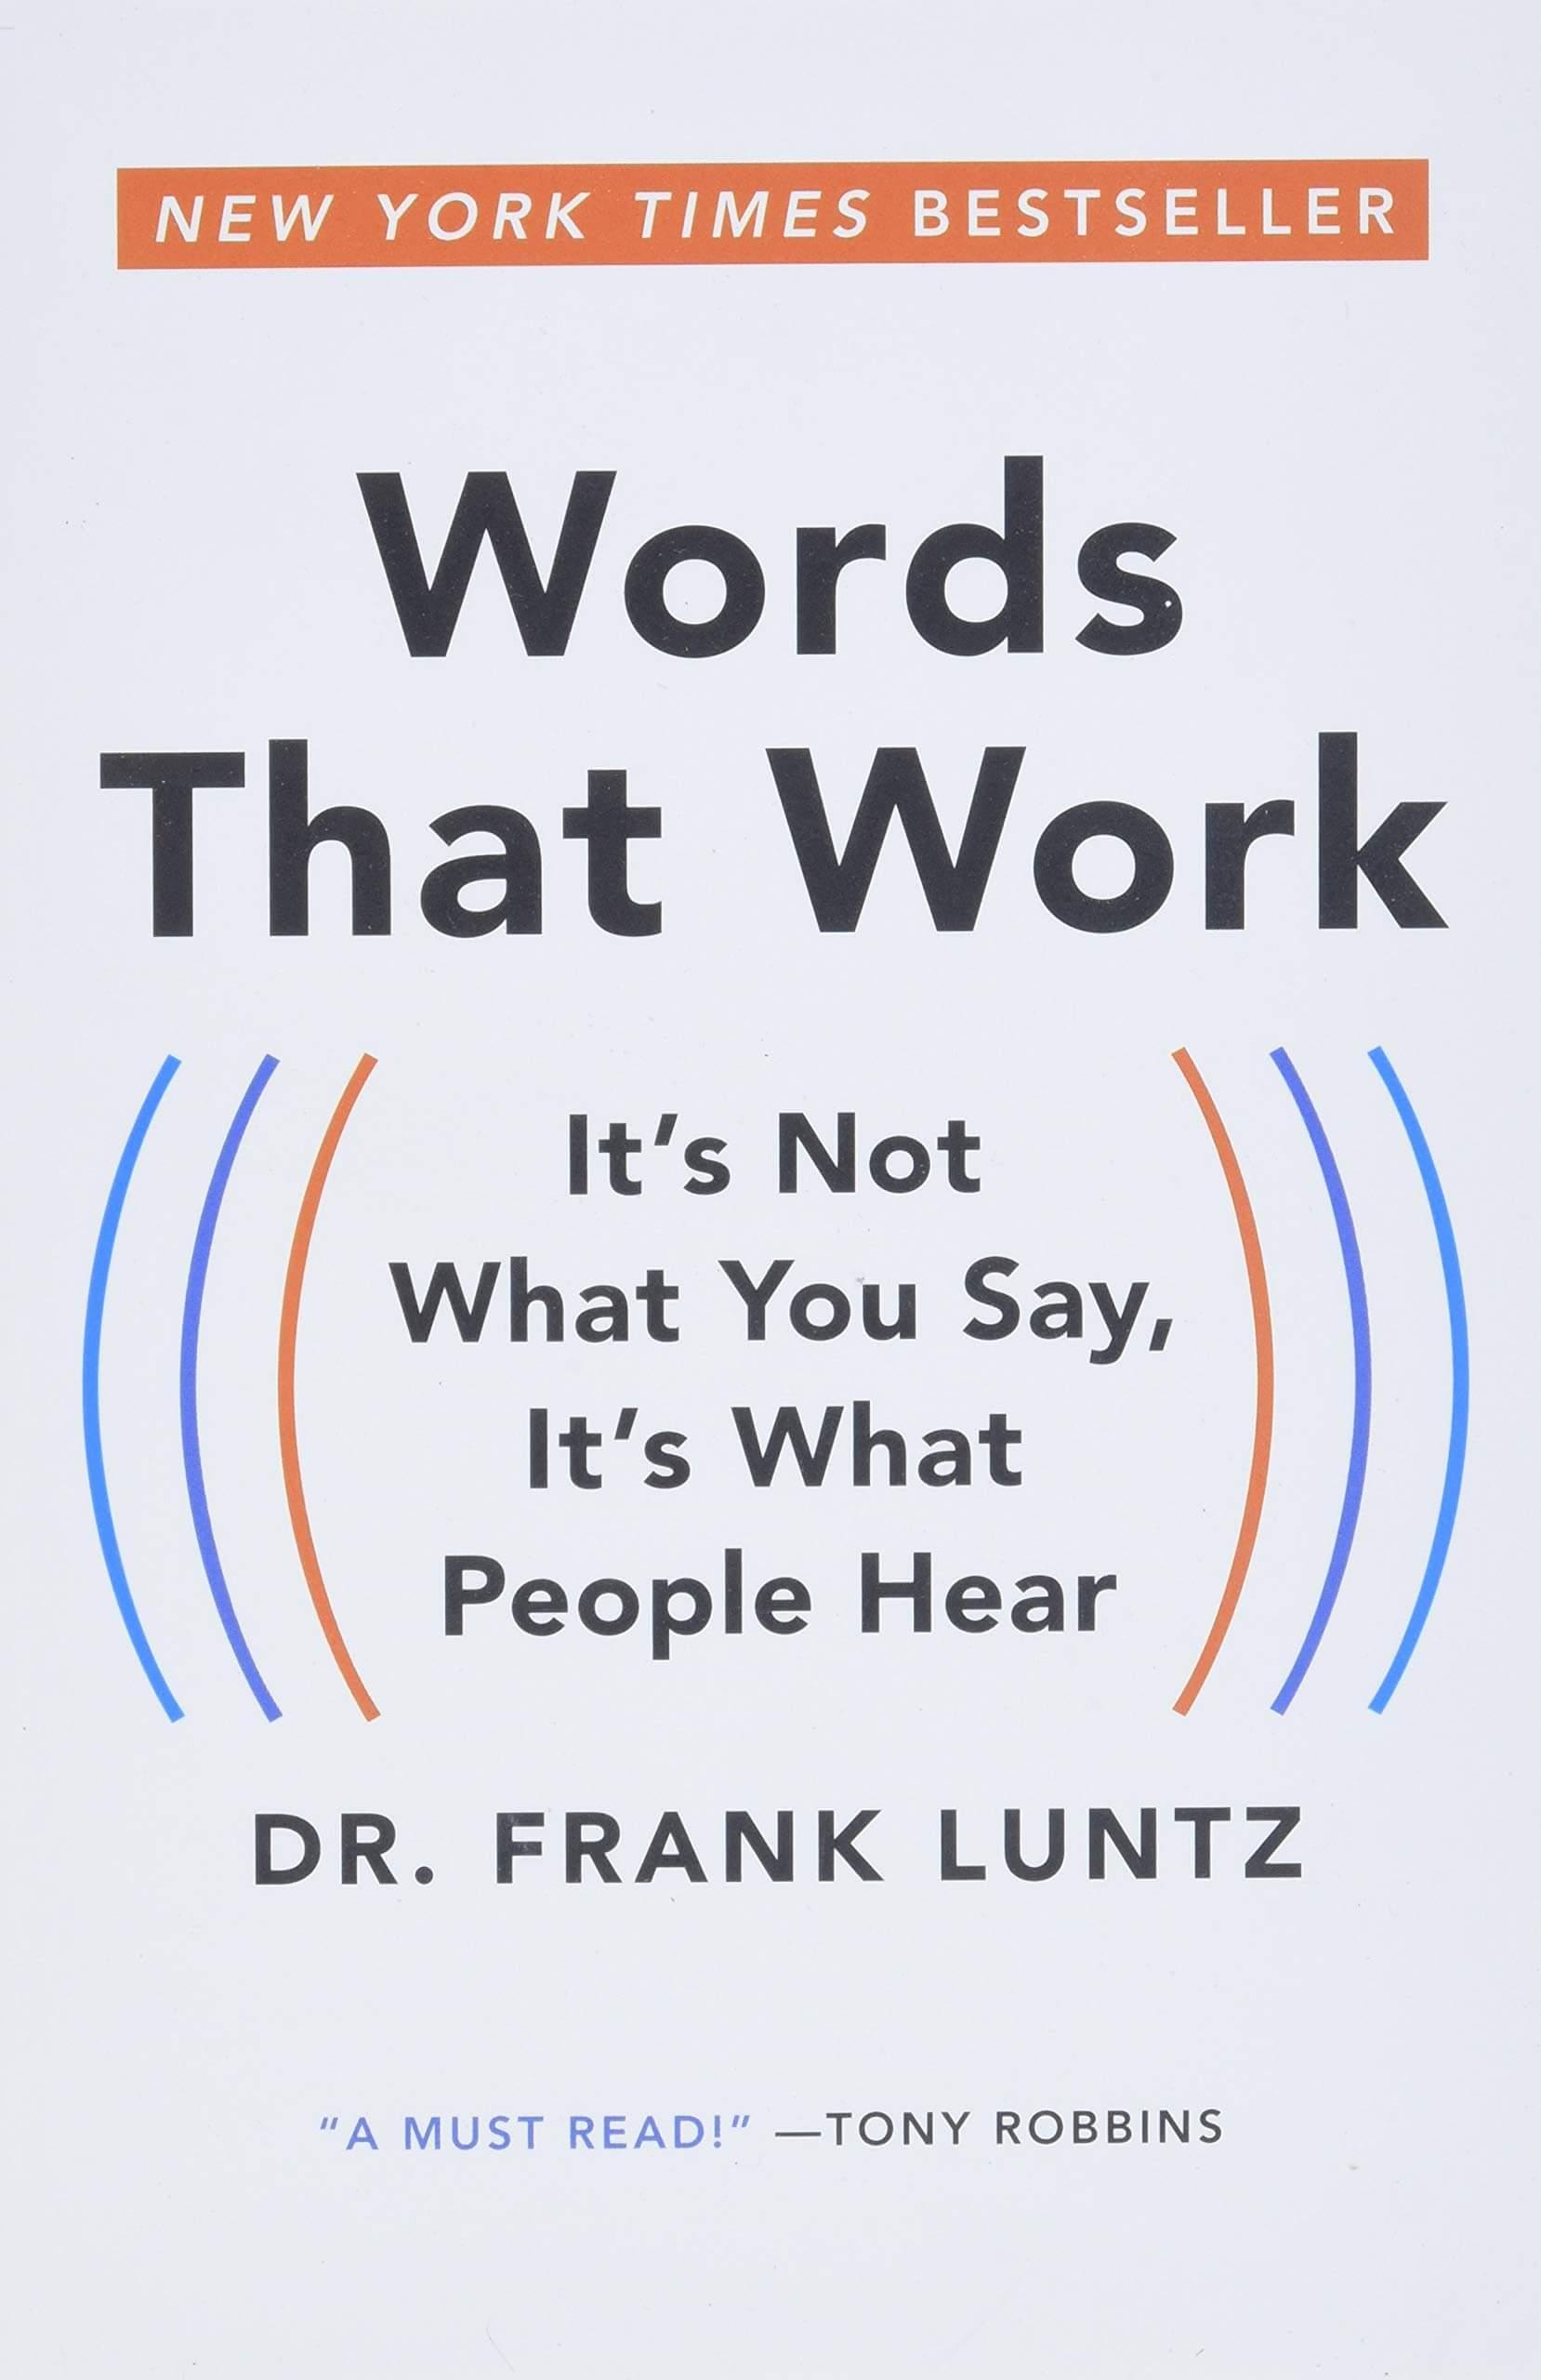 Book cover of Dr. Frank Luntz's "Words That Work"